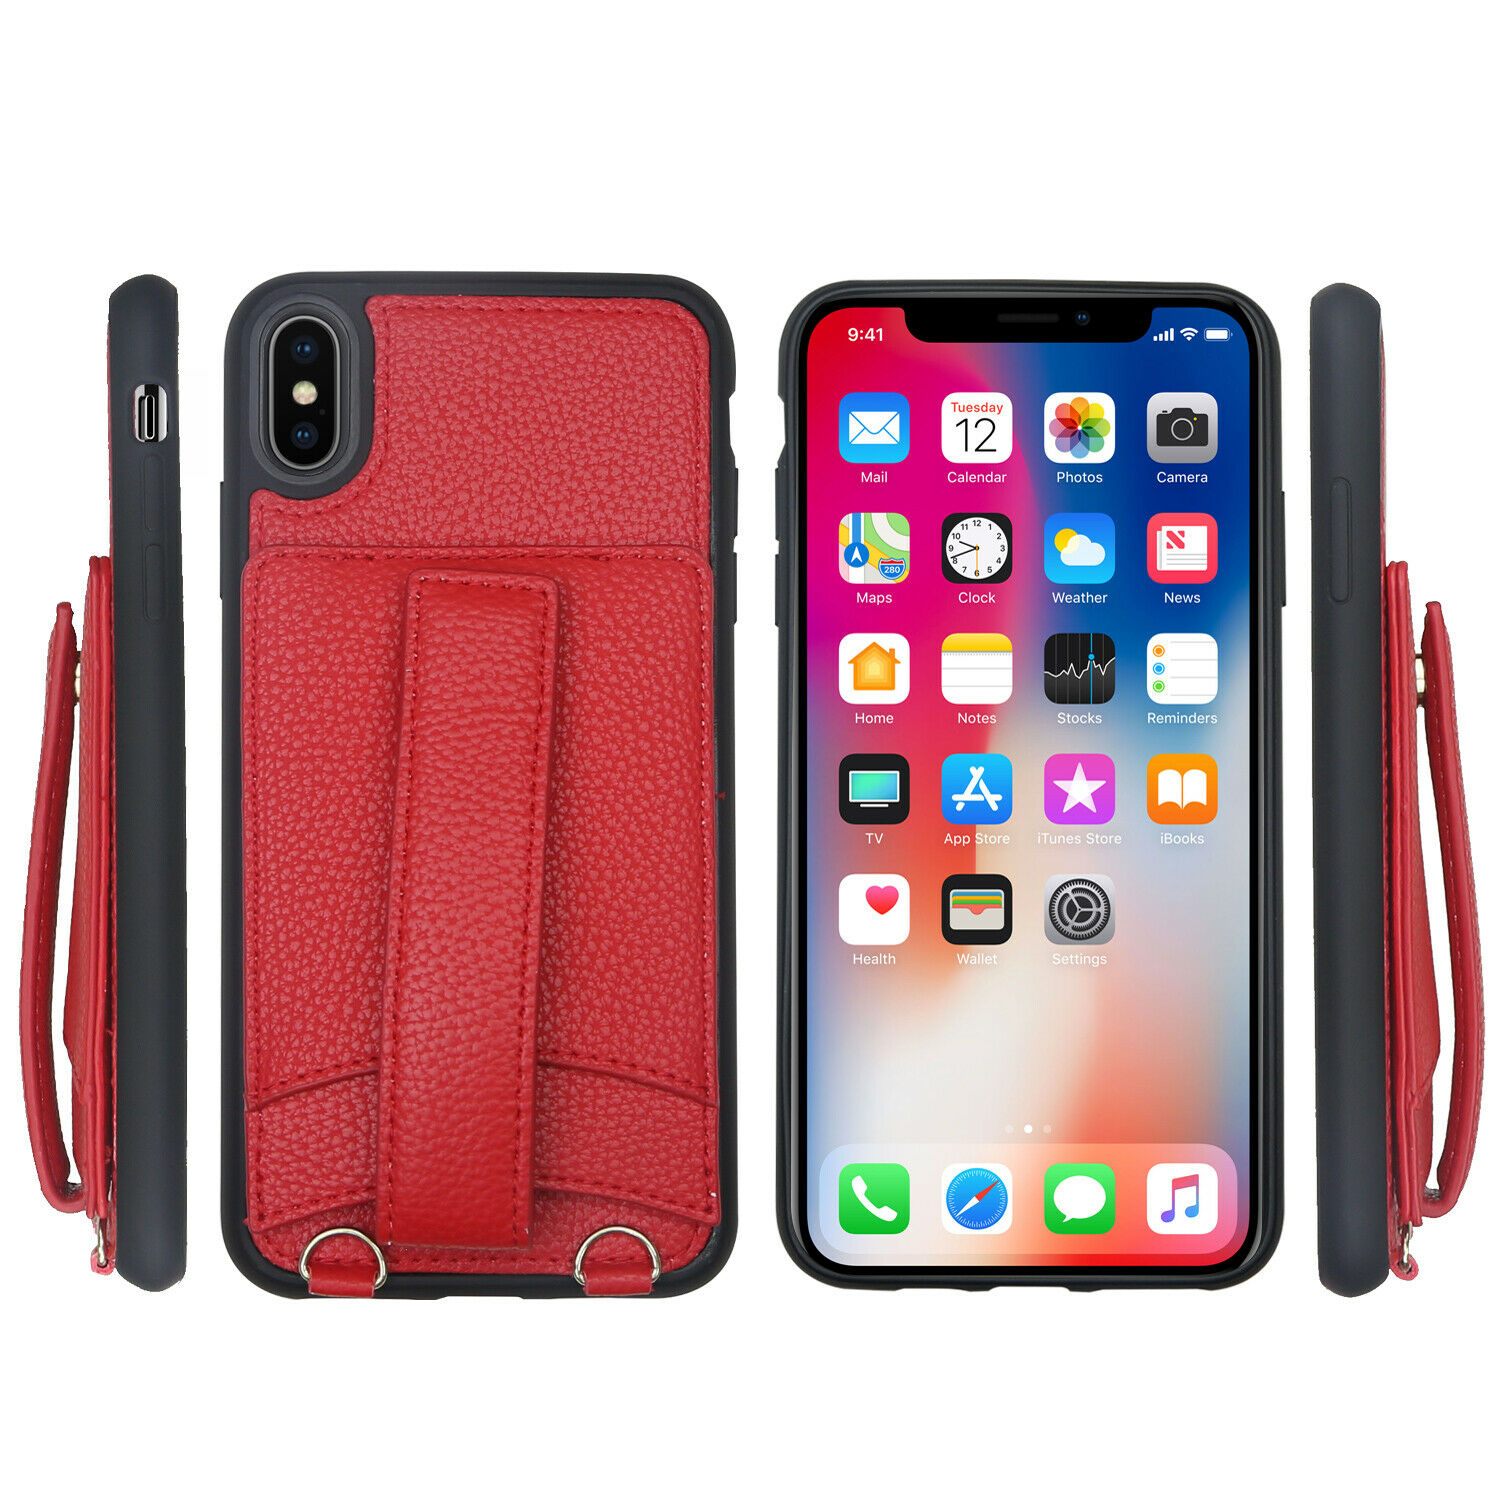 Leather Wallet Crossbody Case for iPhone 11/Pro/XS/Max/X/ SE 2nd Gen/8 7 6 Plus | eBay